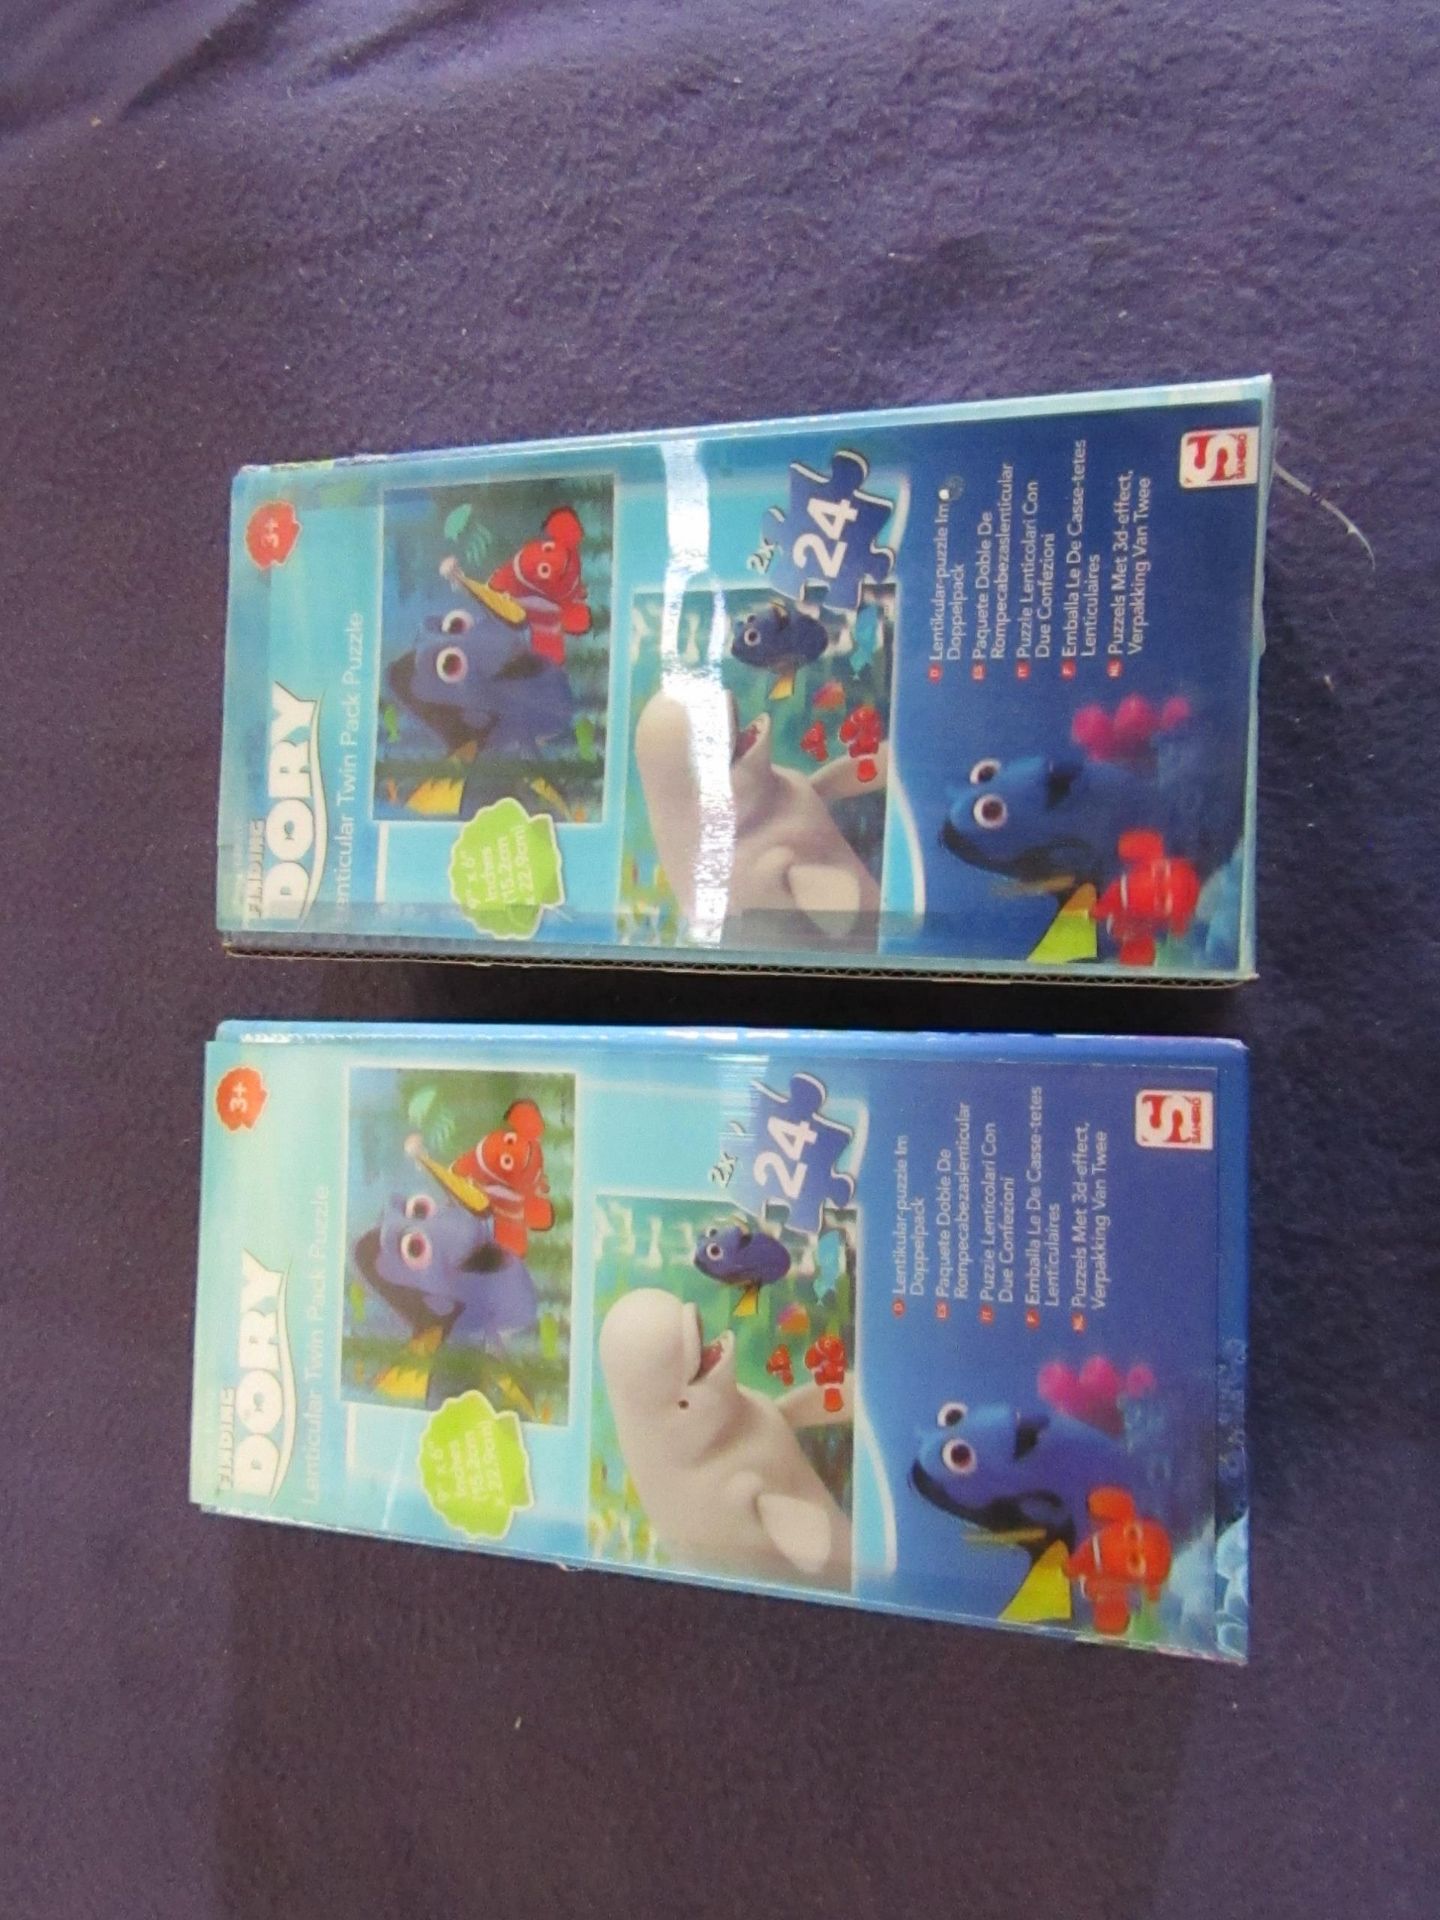 2x Disney - Finding Dory Lenticular Twin Pack Puzzle - Unchecked & Boxed.